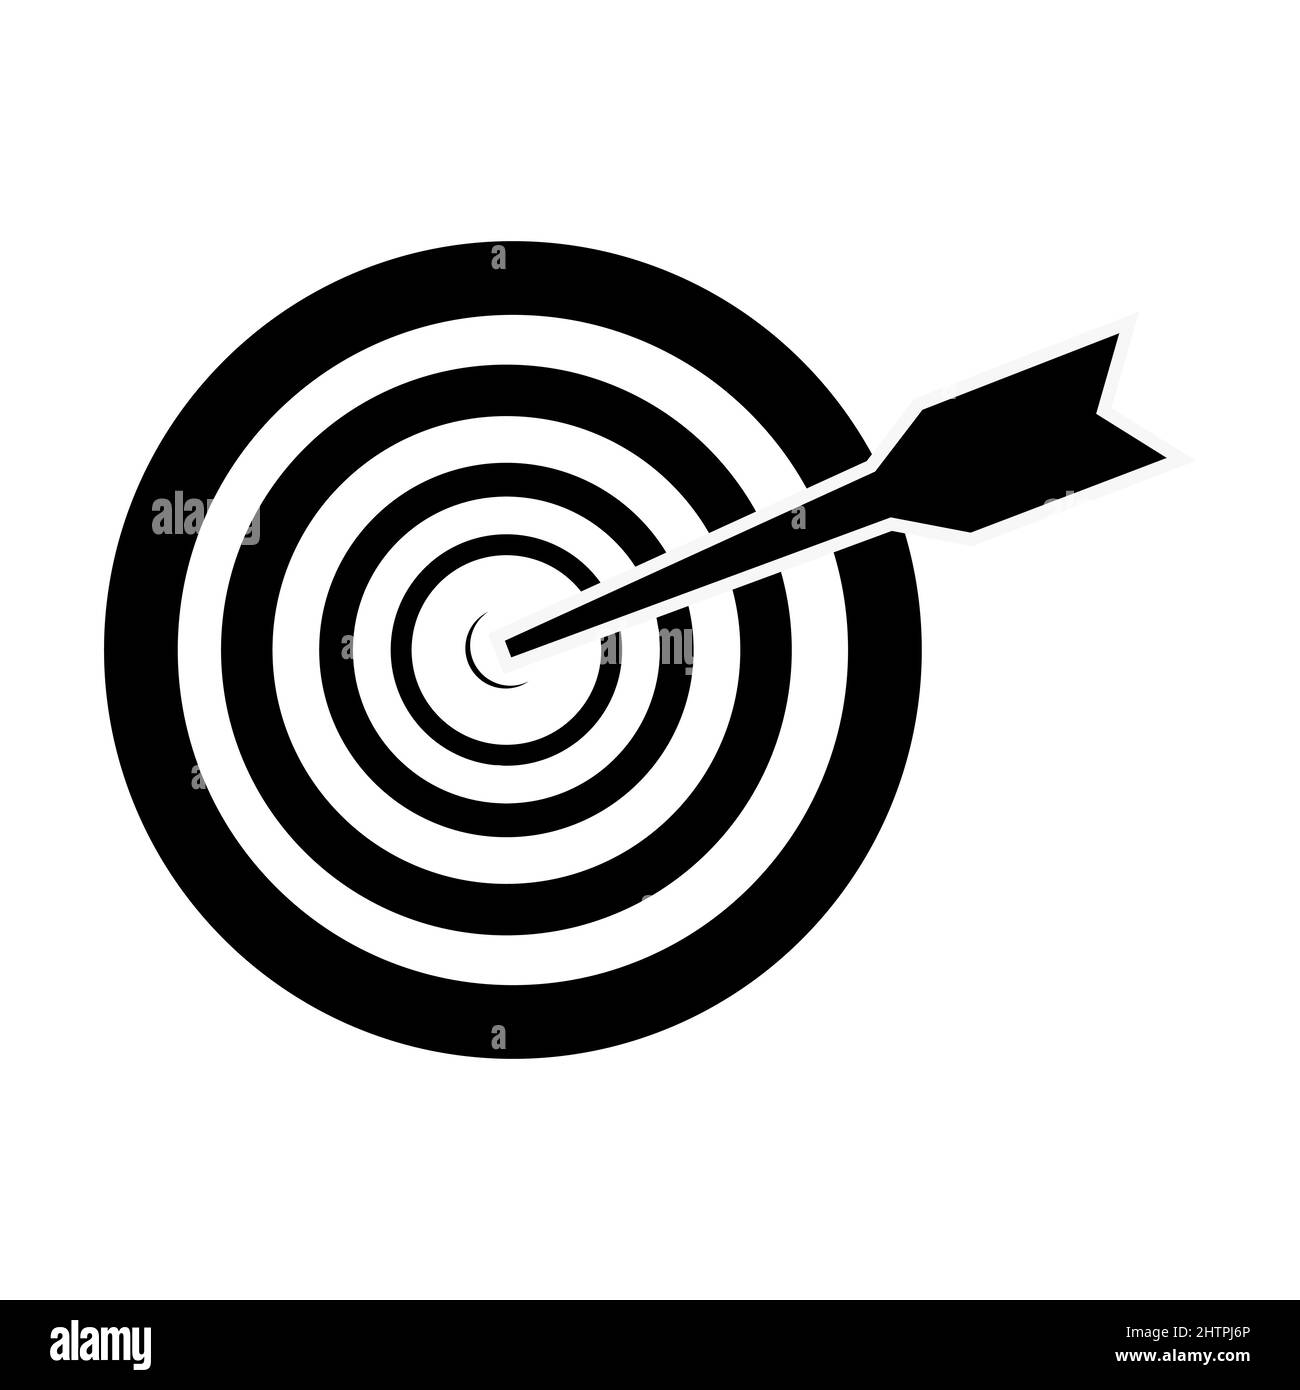 Successful shoot. Darts target aim icon on white background. Vector illustration. Stock Vector